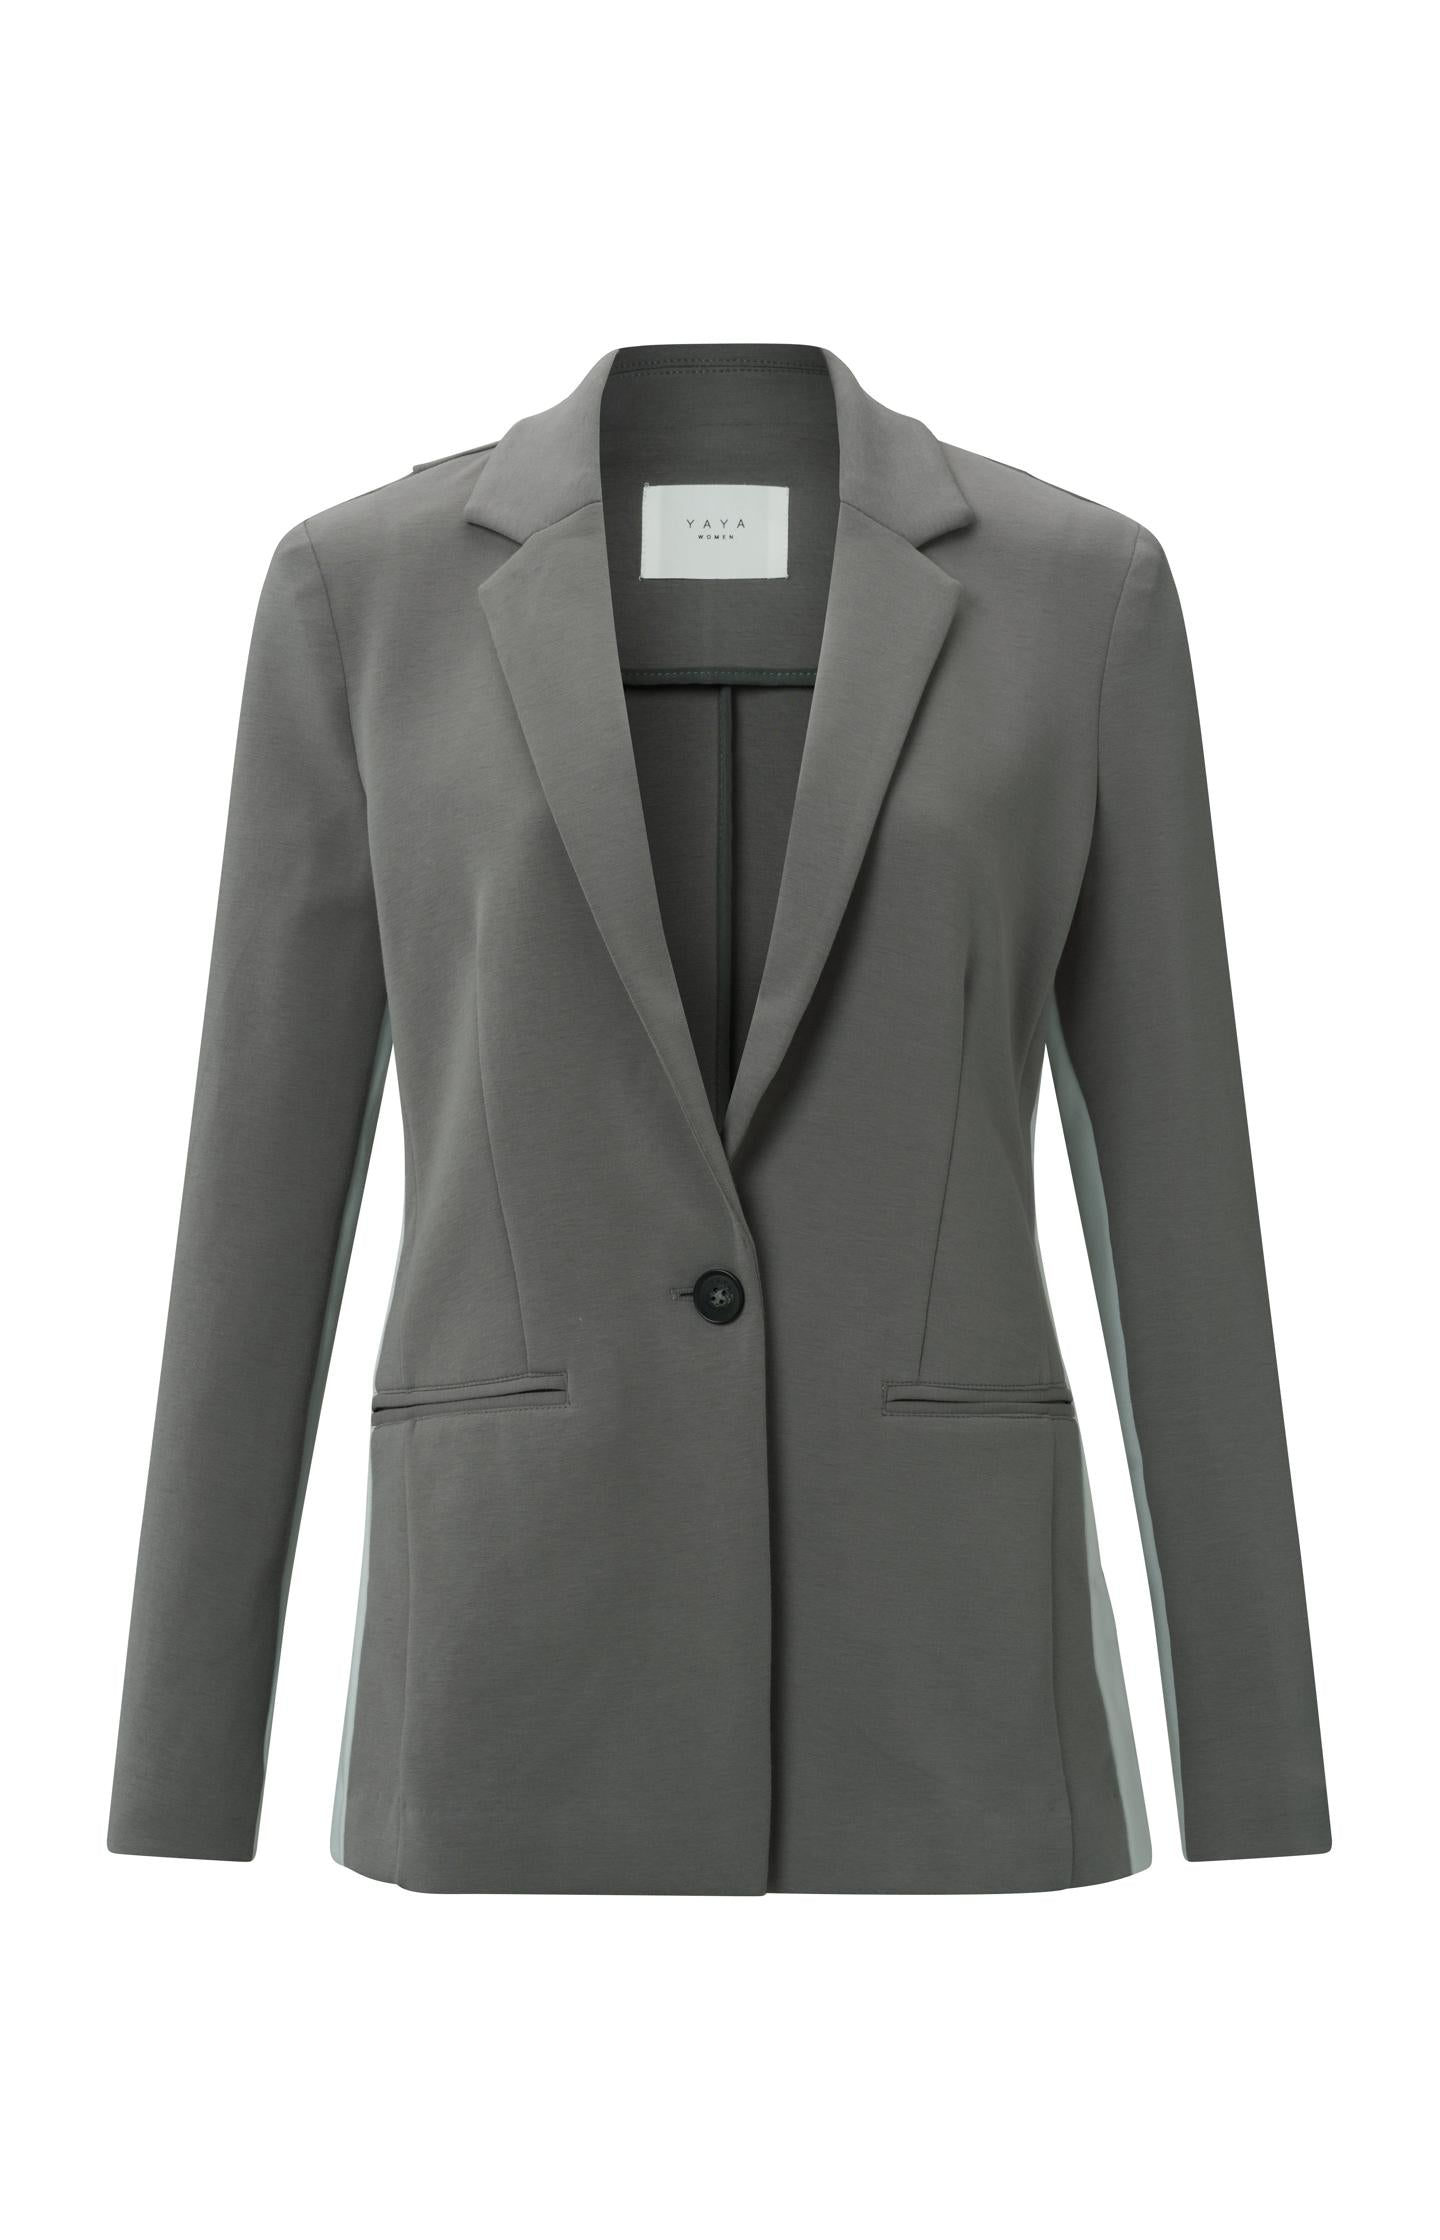 Scuba blazer with long sleeves, a button and a stripe - Type: product